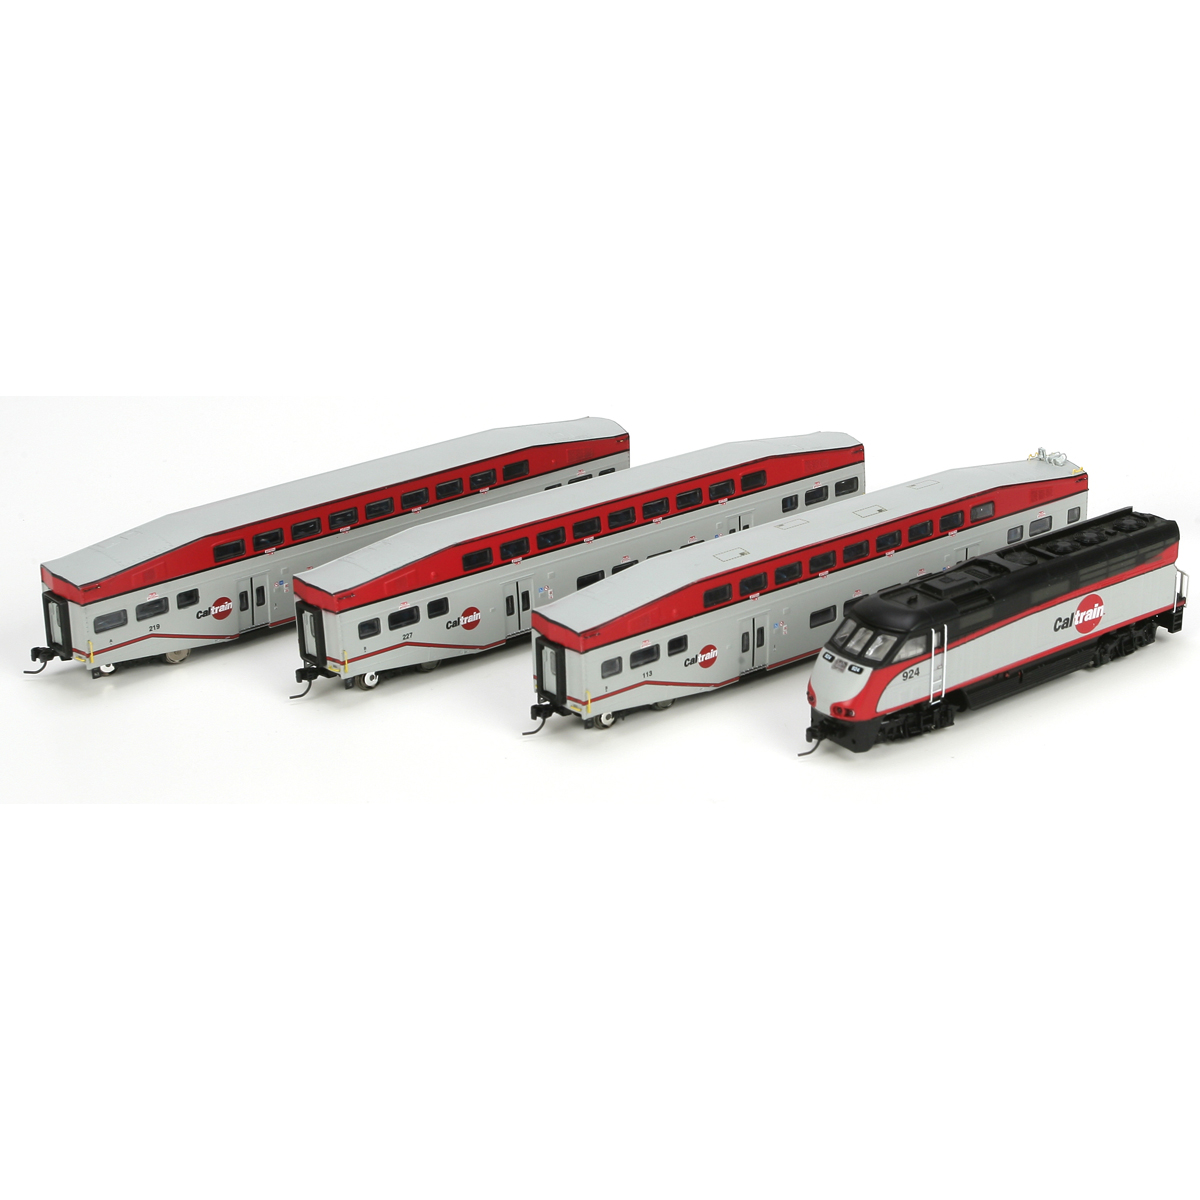 N Scale - Athearn - 25980 - Passenger Car, Commuter, Bombardier Multi-Level - Caltrain - 4 numbers